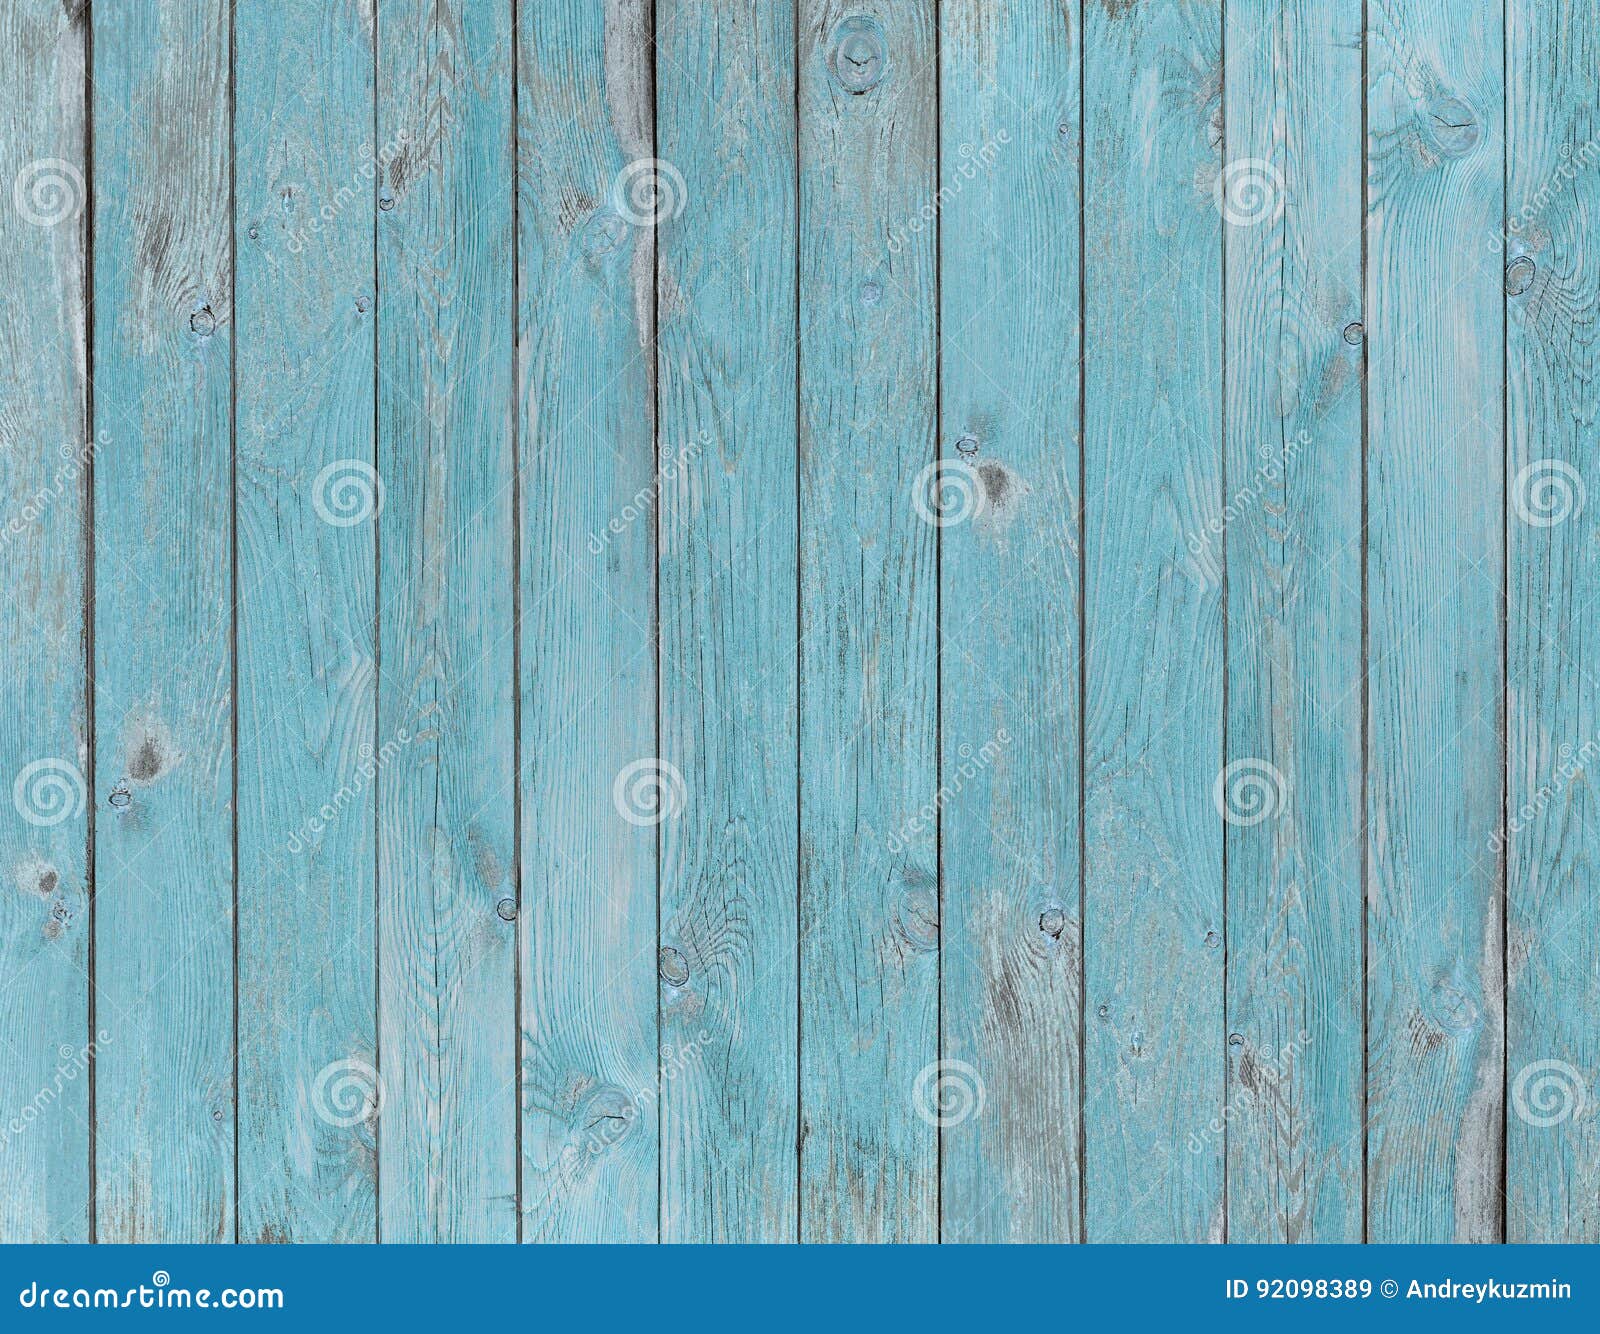 blue old wood planks texture or background